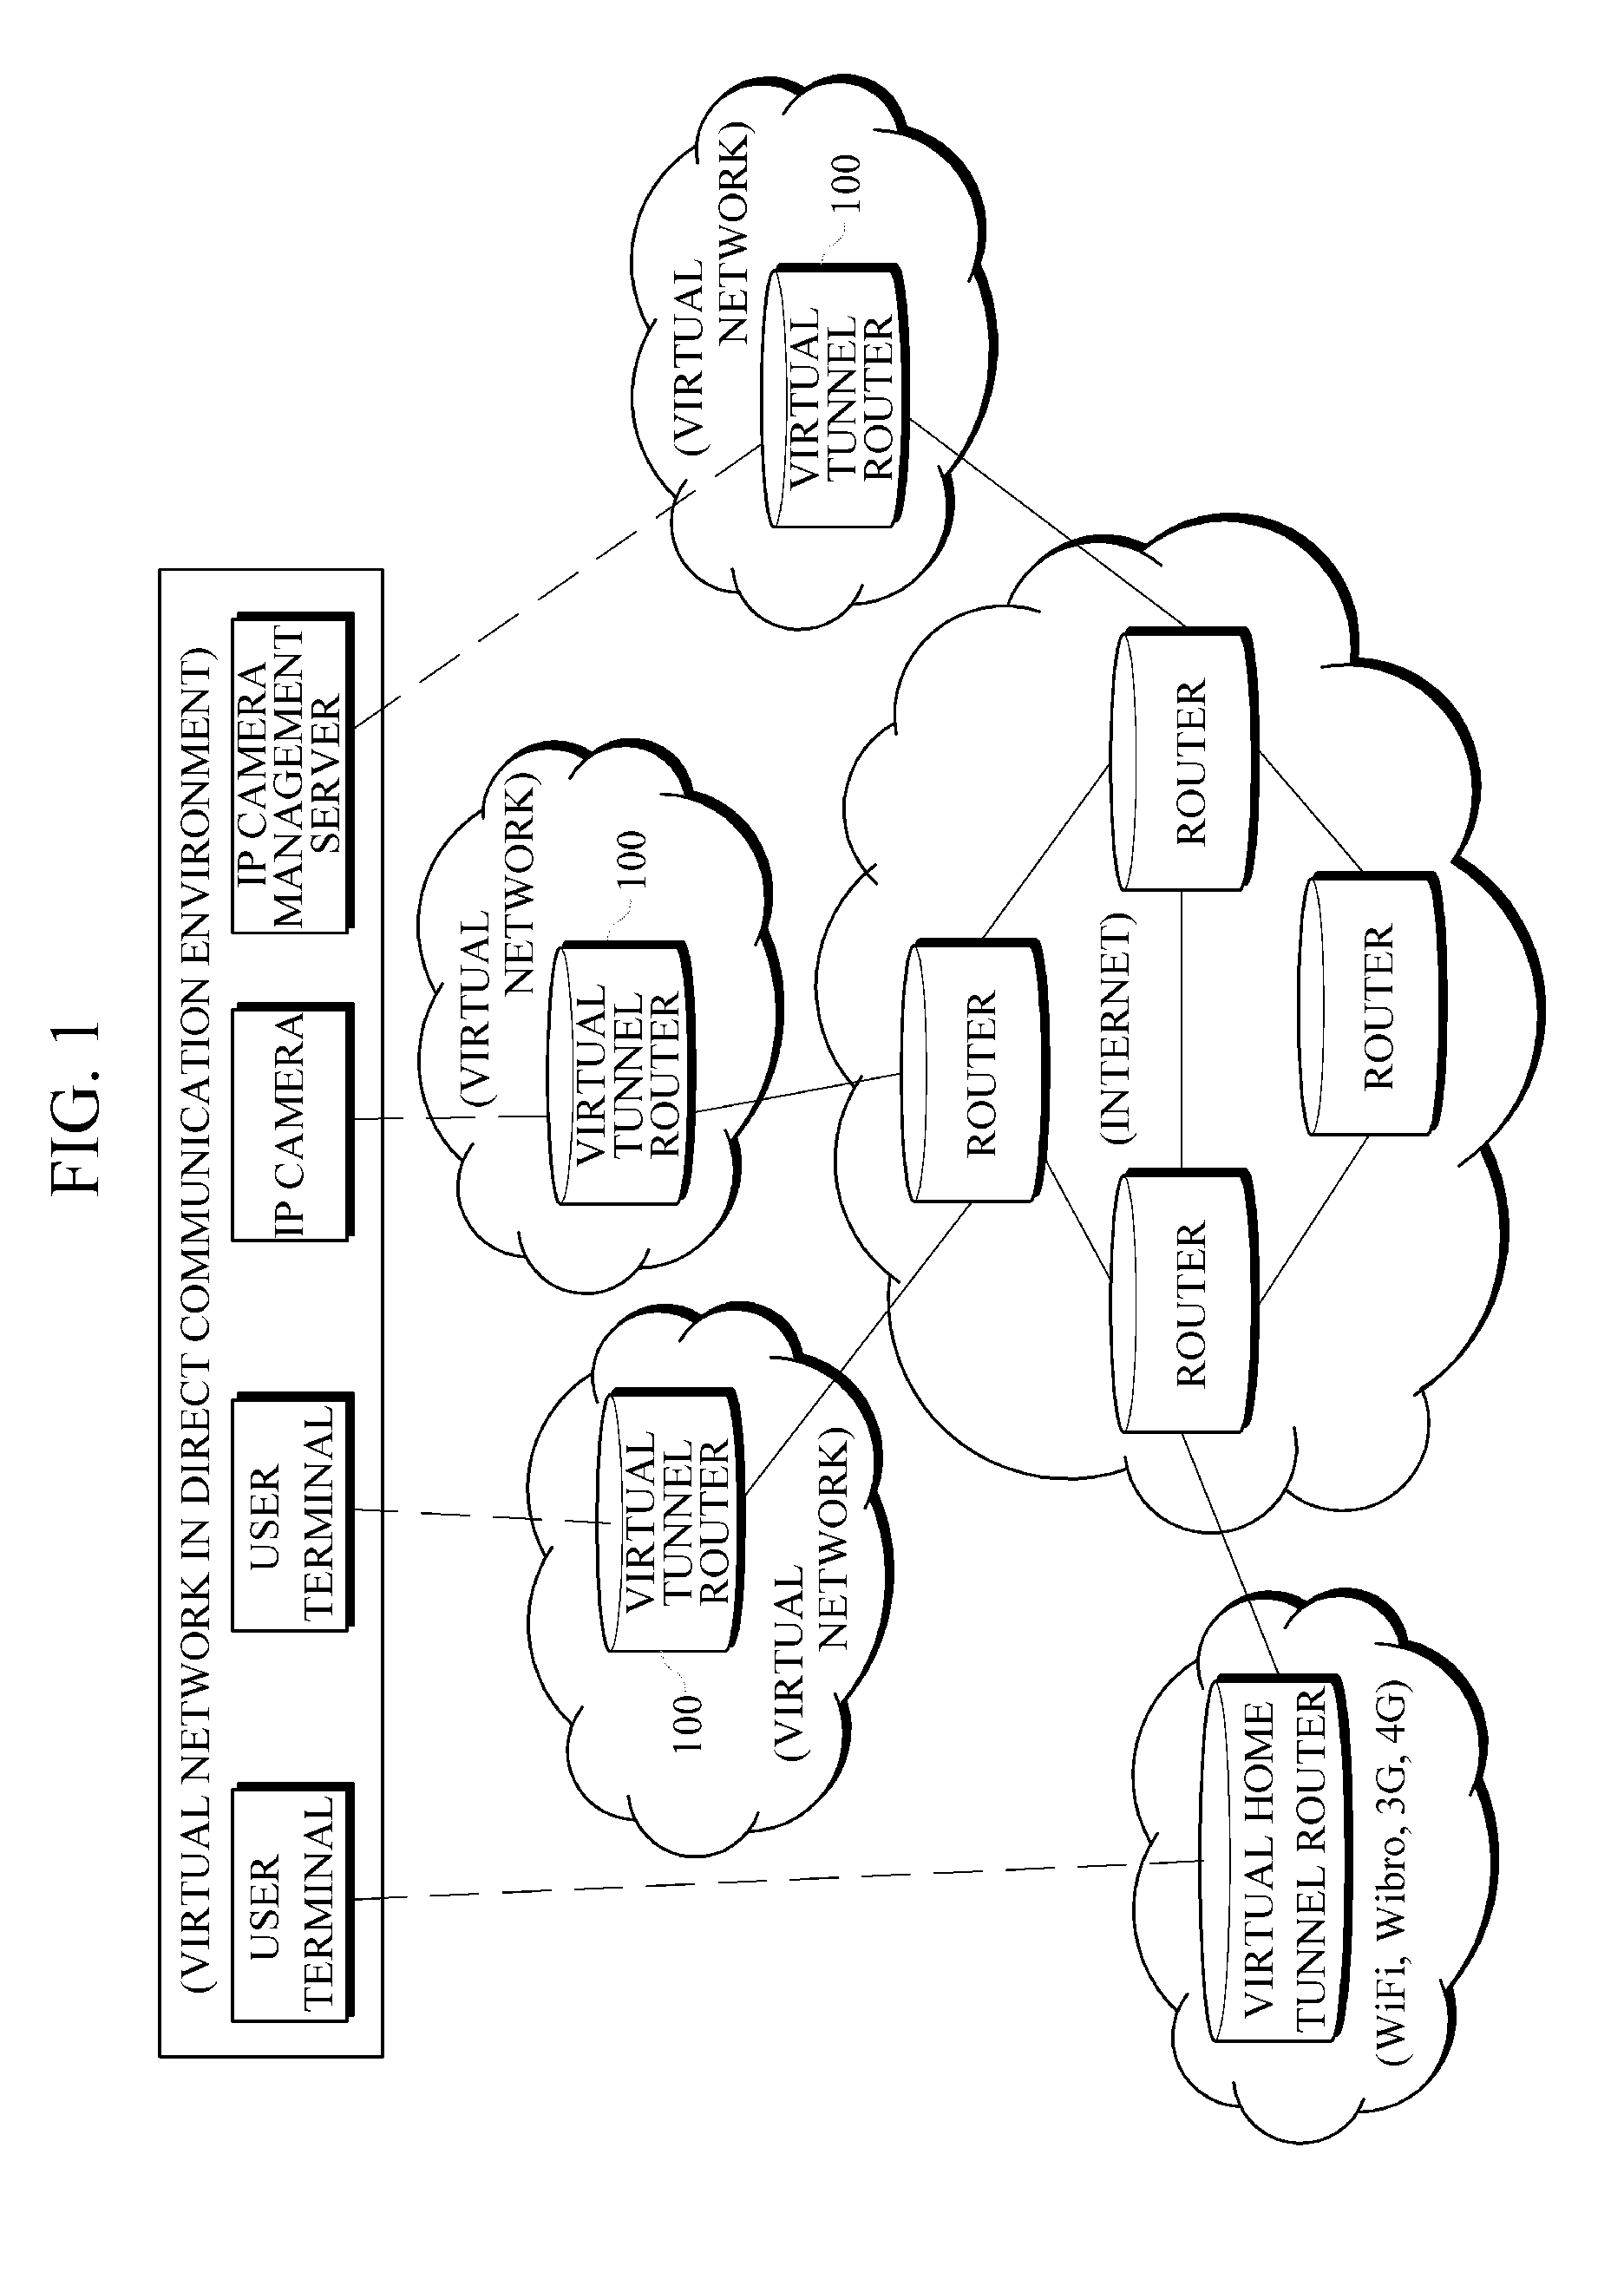 Virtual tunnel router, IP camera management server and location-based IP camera service method